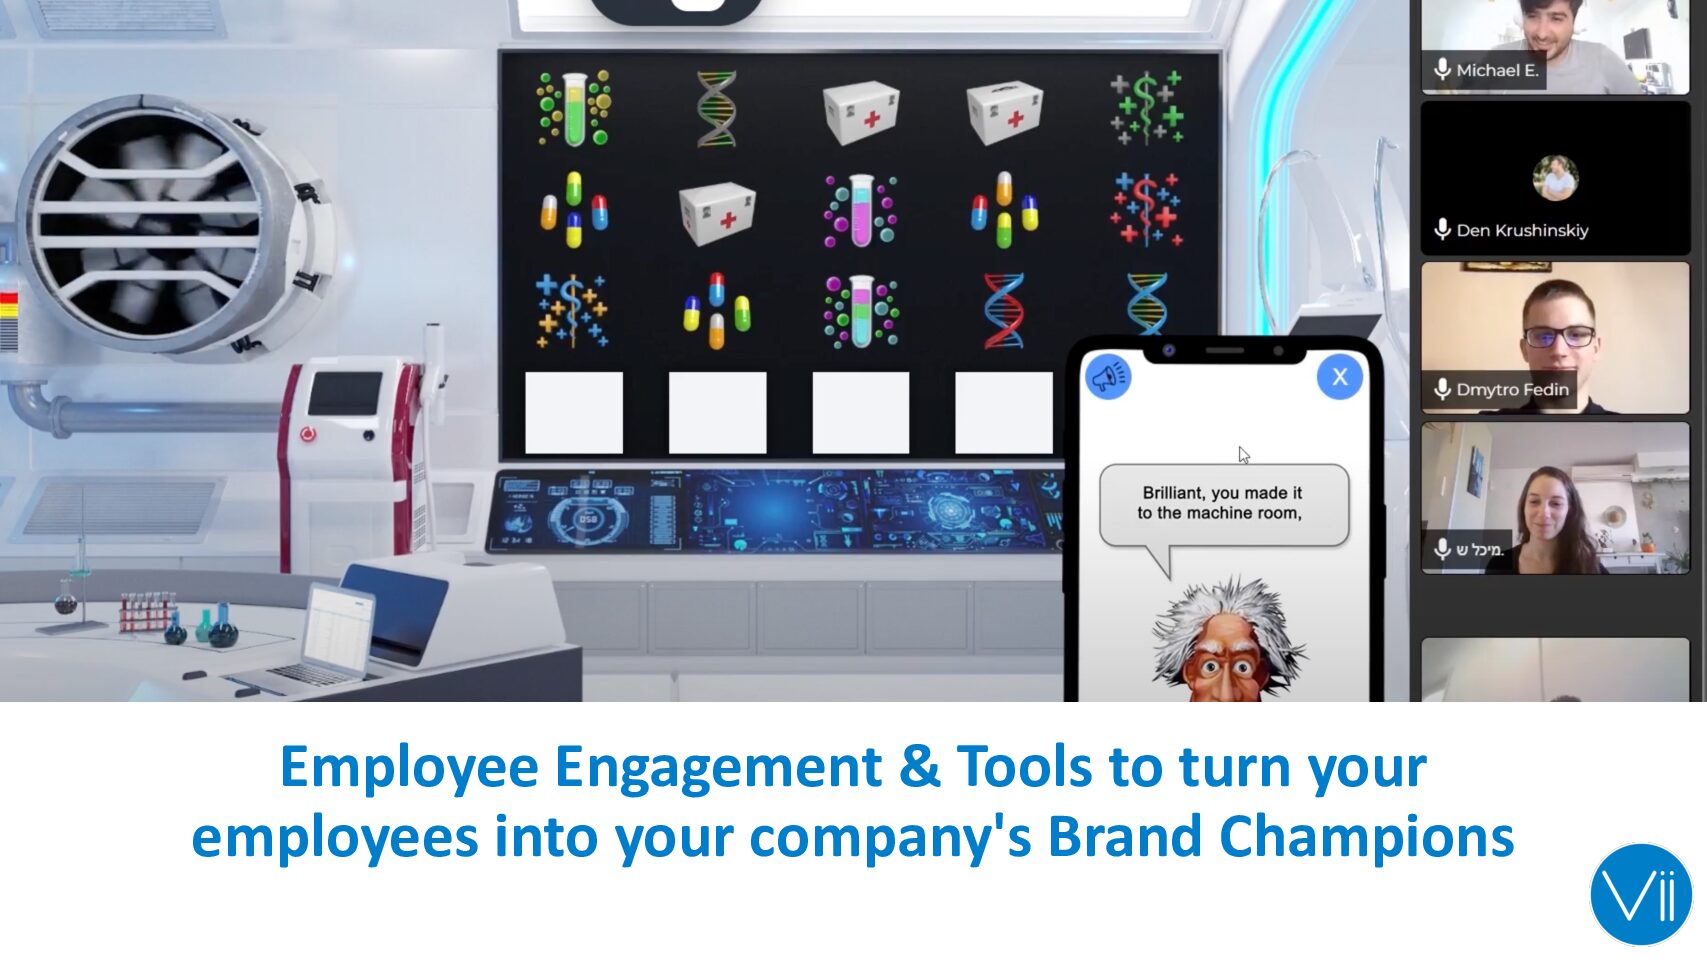 Employee Engagement & Tools to turn your employees into your company’s Brand Champions￼